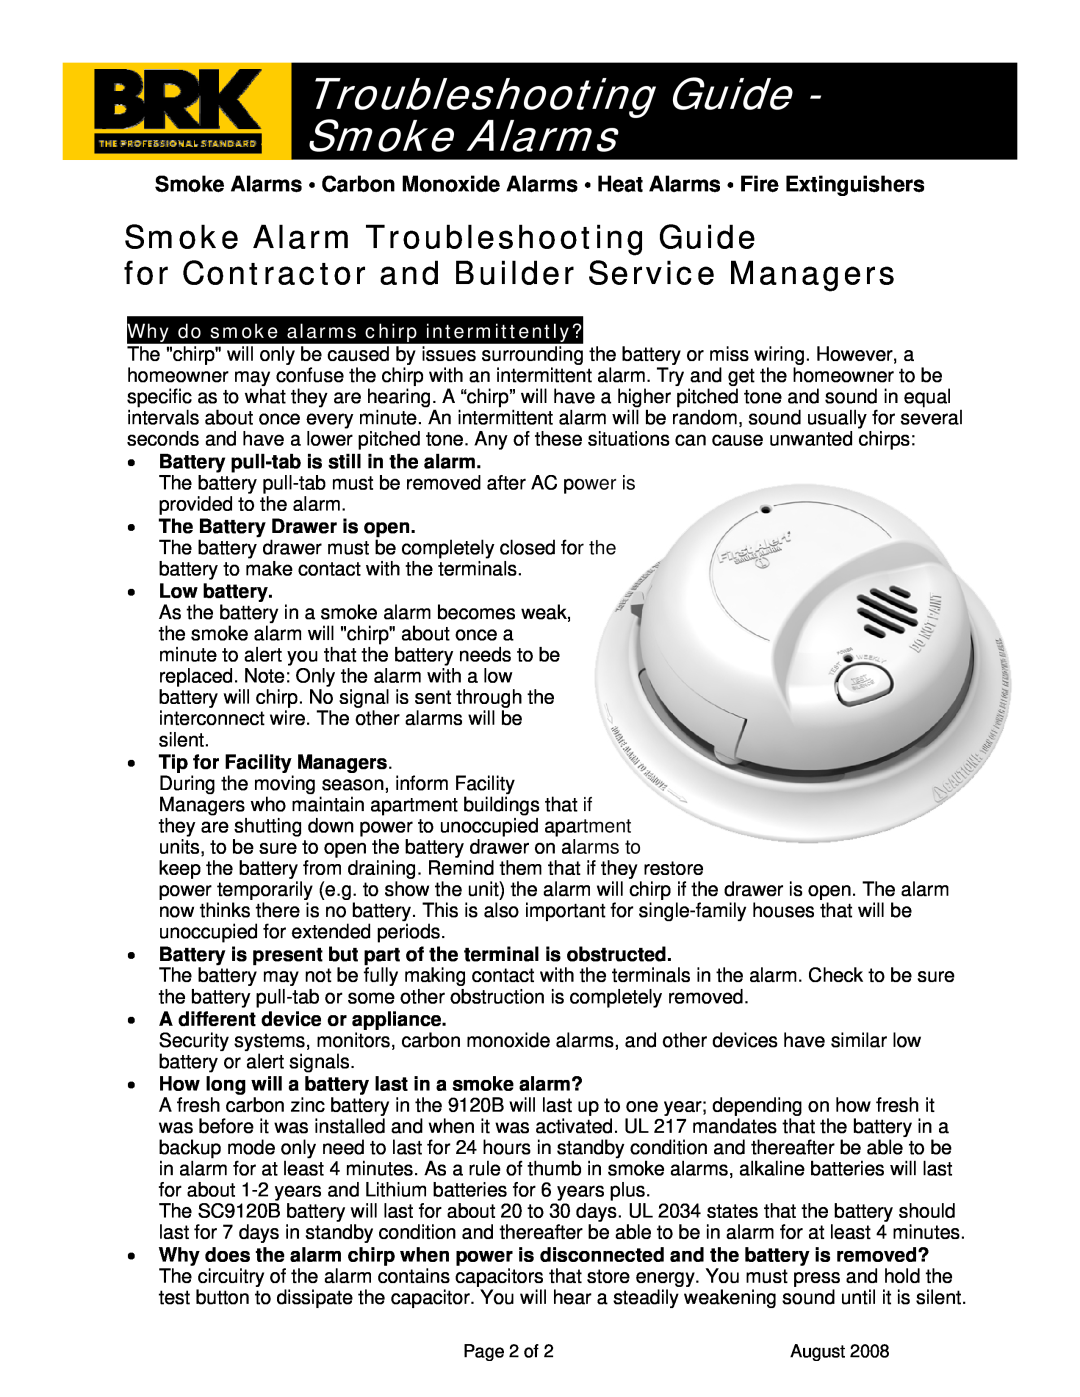 BRK electronic manual Why do smoke alarms chirp intermittently?, Troubleshooting Guide Smoke Alarms 